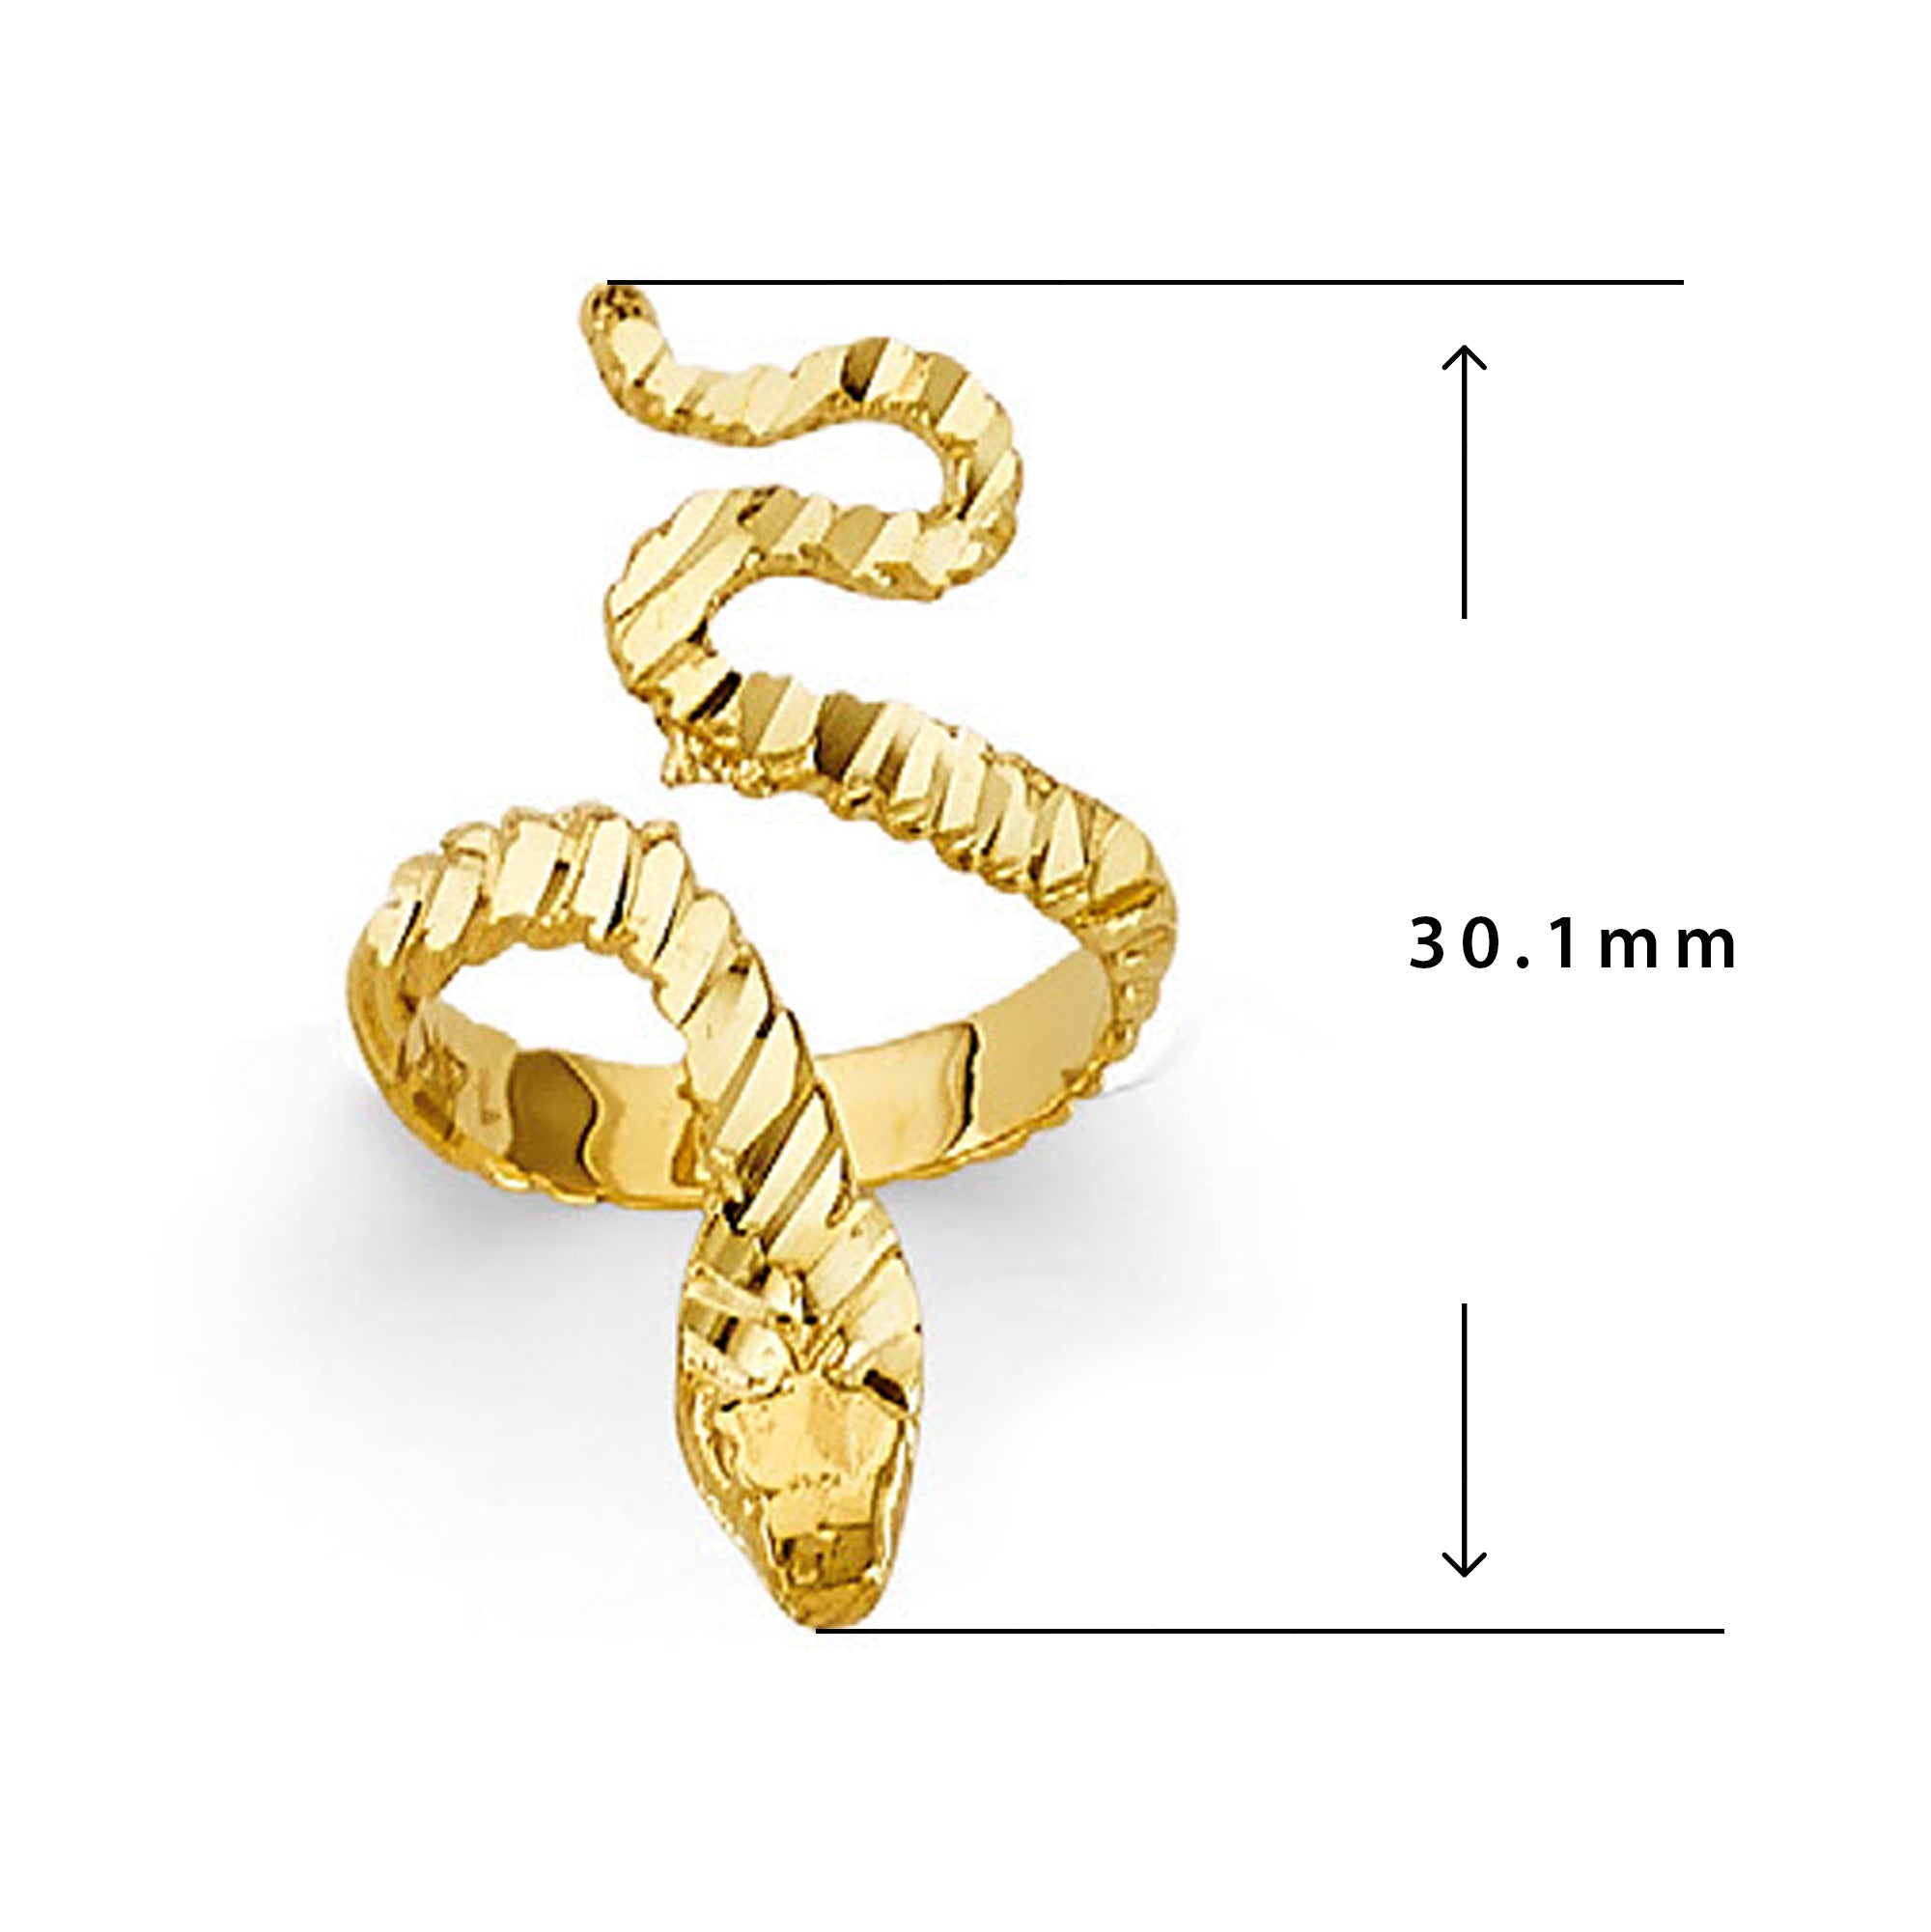 Moving-snake Serpent Ring in Solid Gold with Measurement